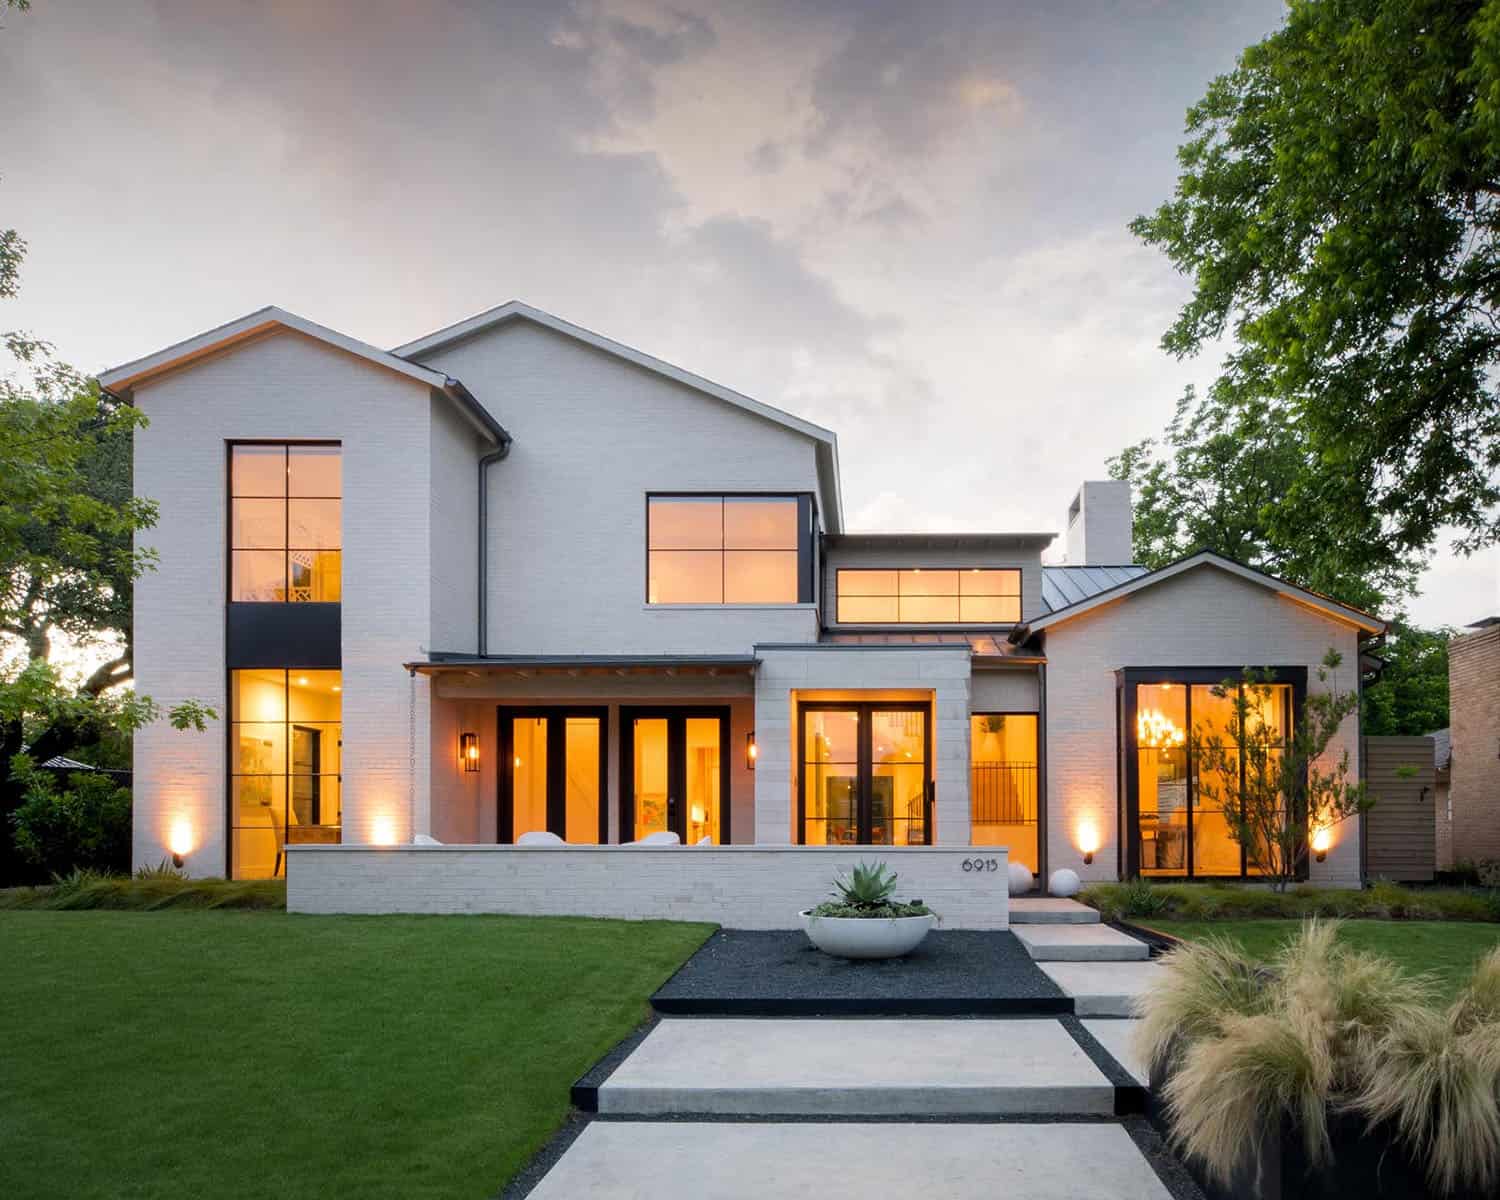 California modern meets Texas in this absolutely gorgeous Dallas home